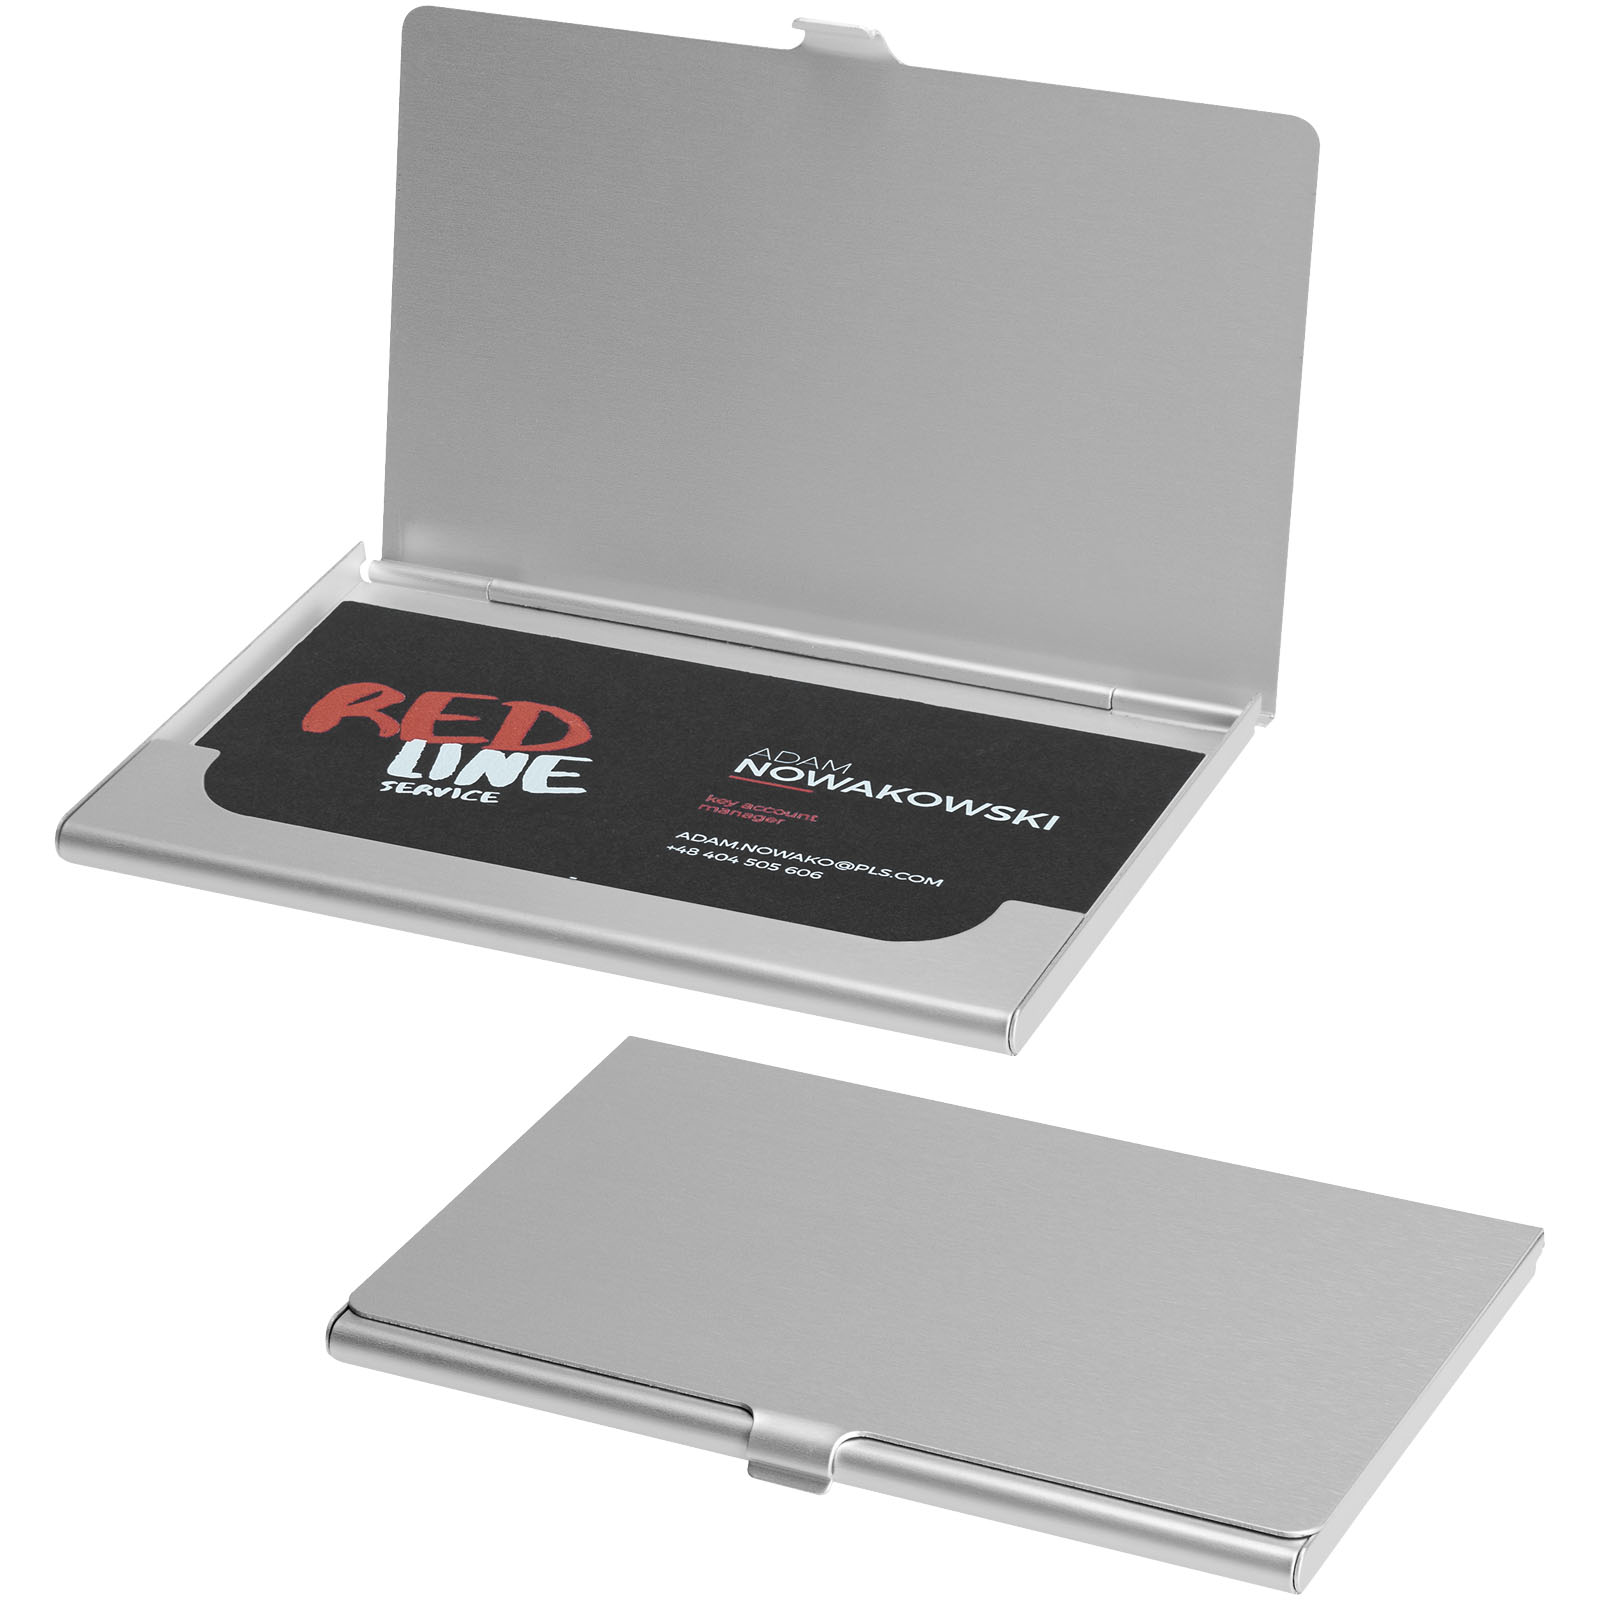 Aluminium business card holder ROBERTS, capacity up to 10 business cards - silver